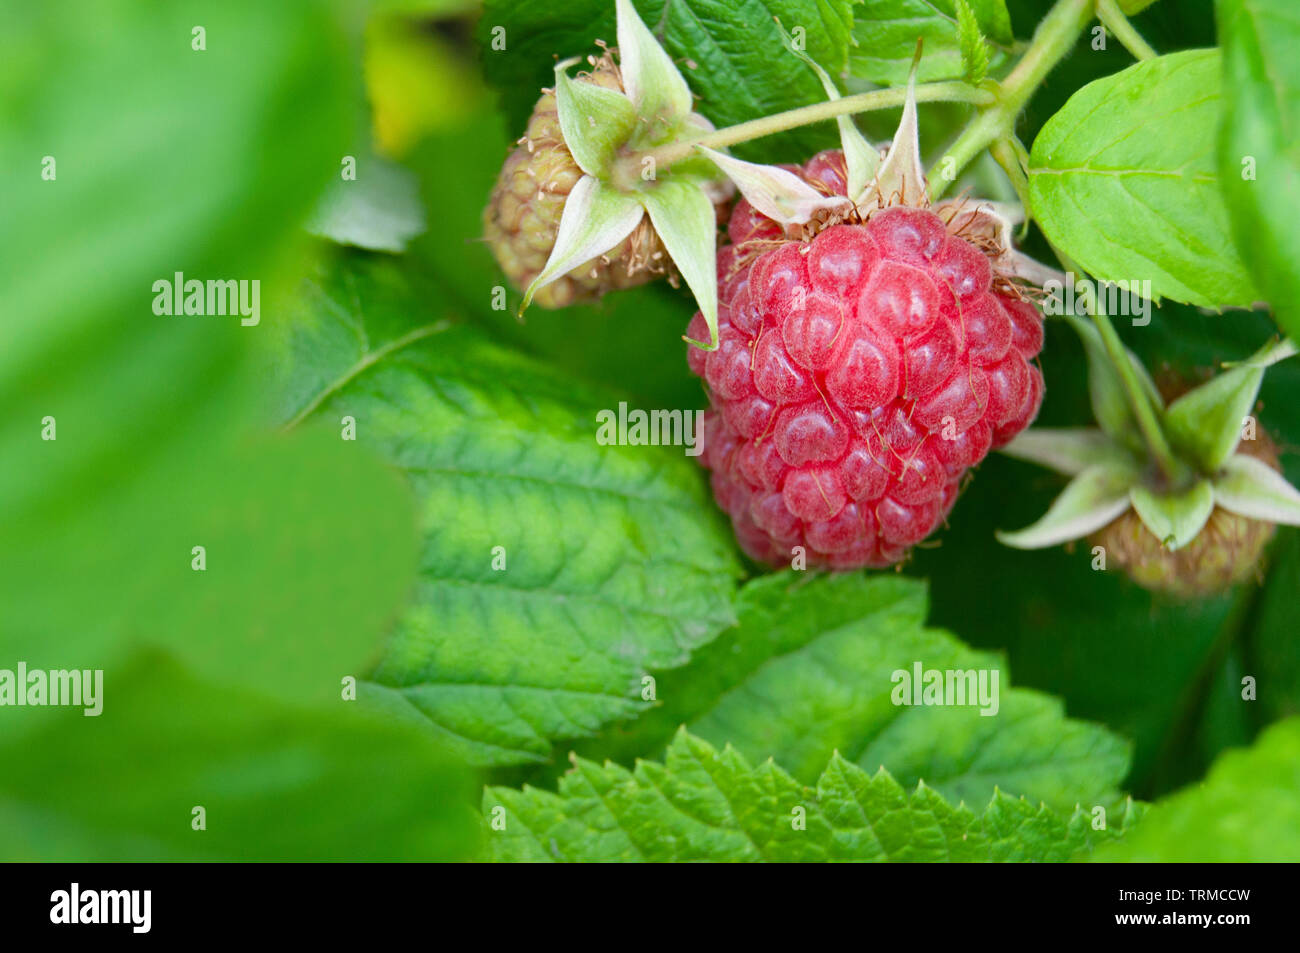 Group of three raspberries in the garden with green background Stock Photo